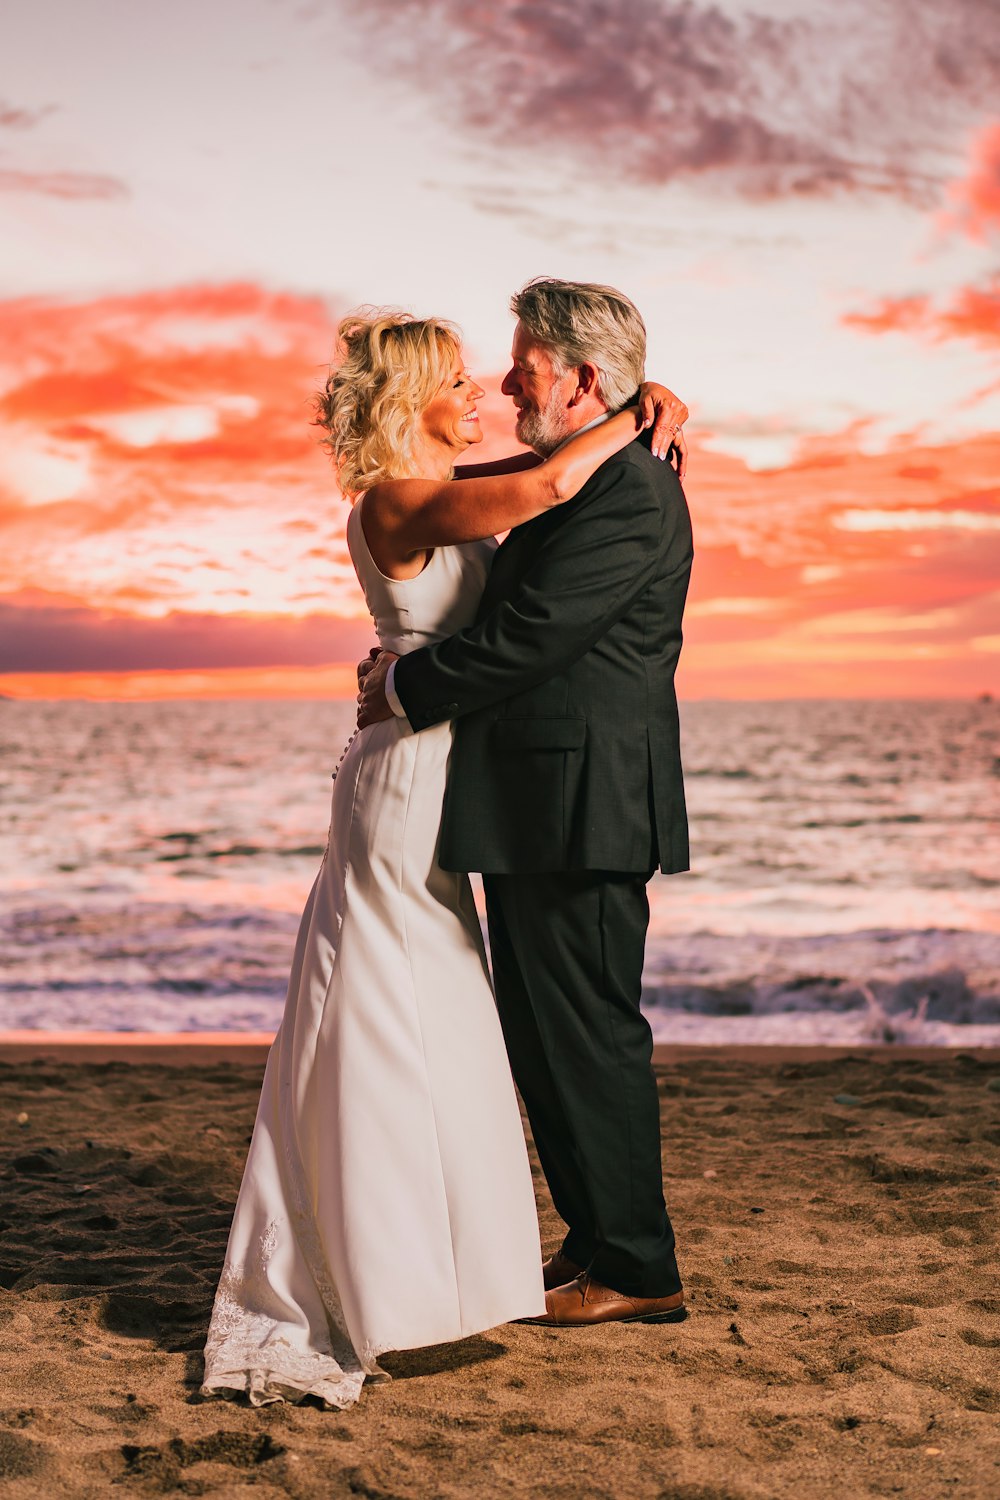 a bride and groom embracing on the beach at sunset